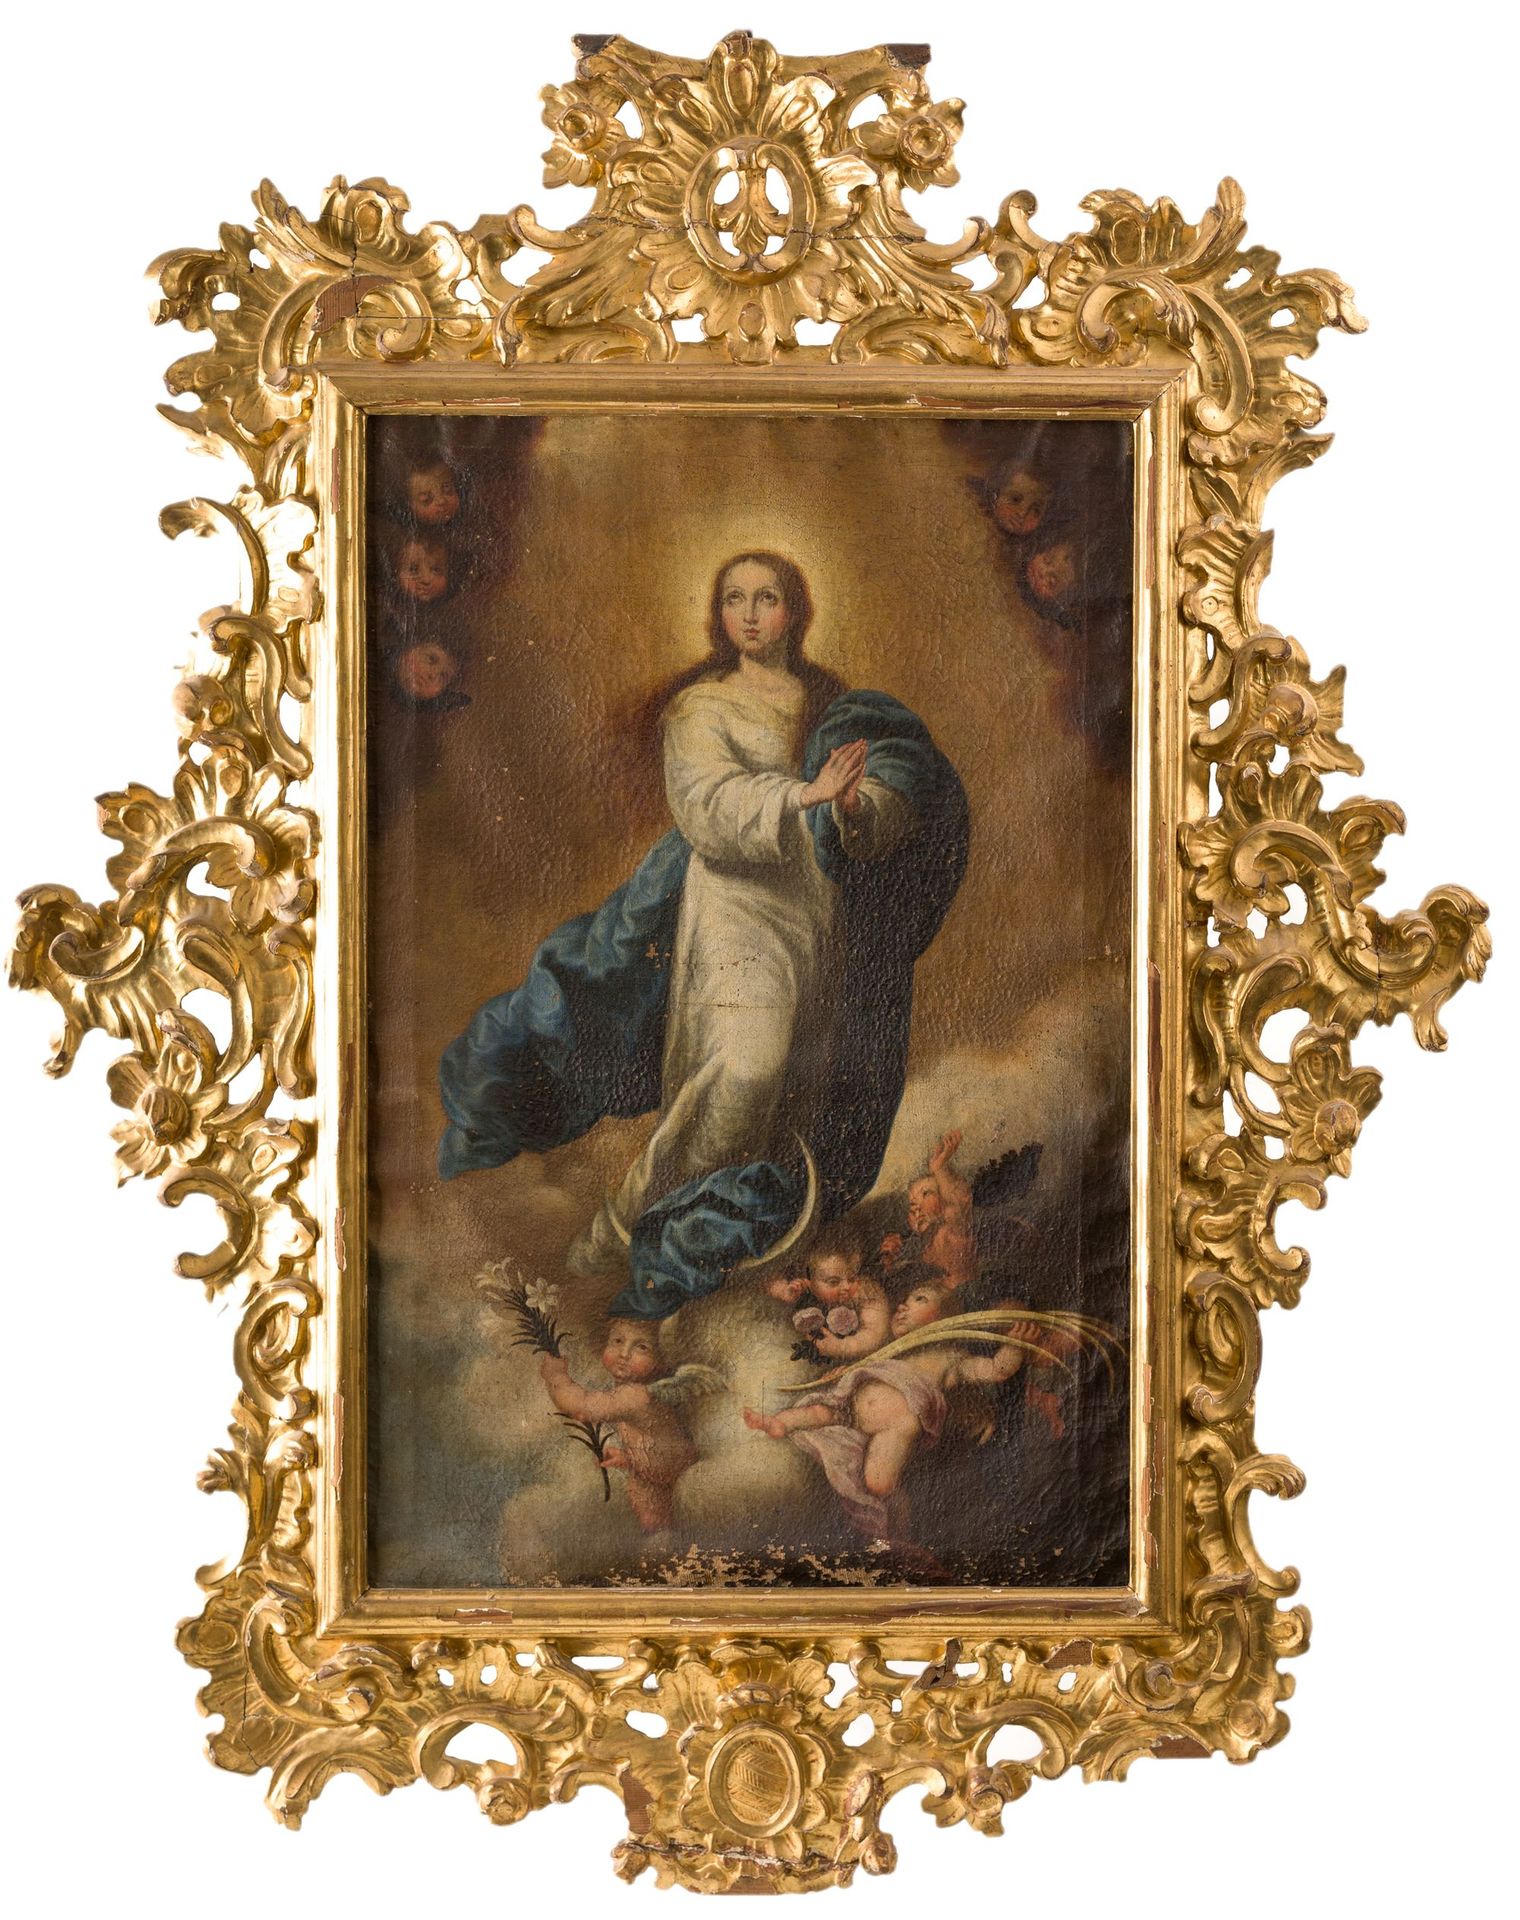 SPANISH SCHOOL (C. 17th / C. 18th) "Immaculate Conception" qui a besoin d'être r&hellip;